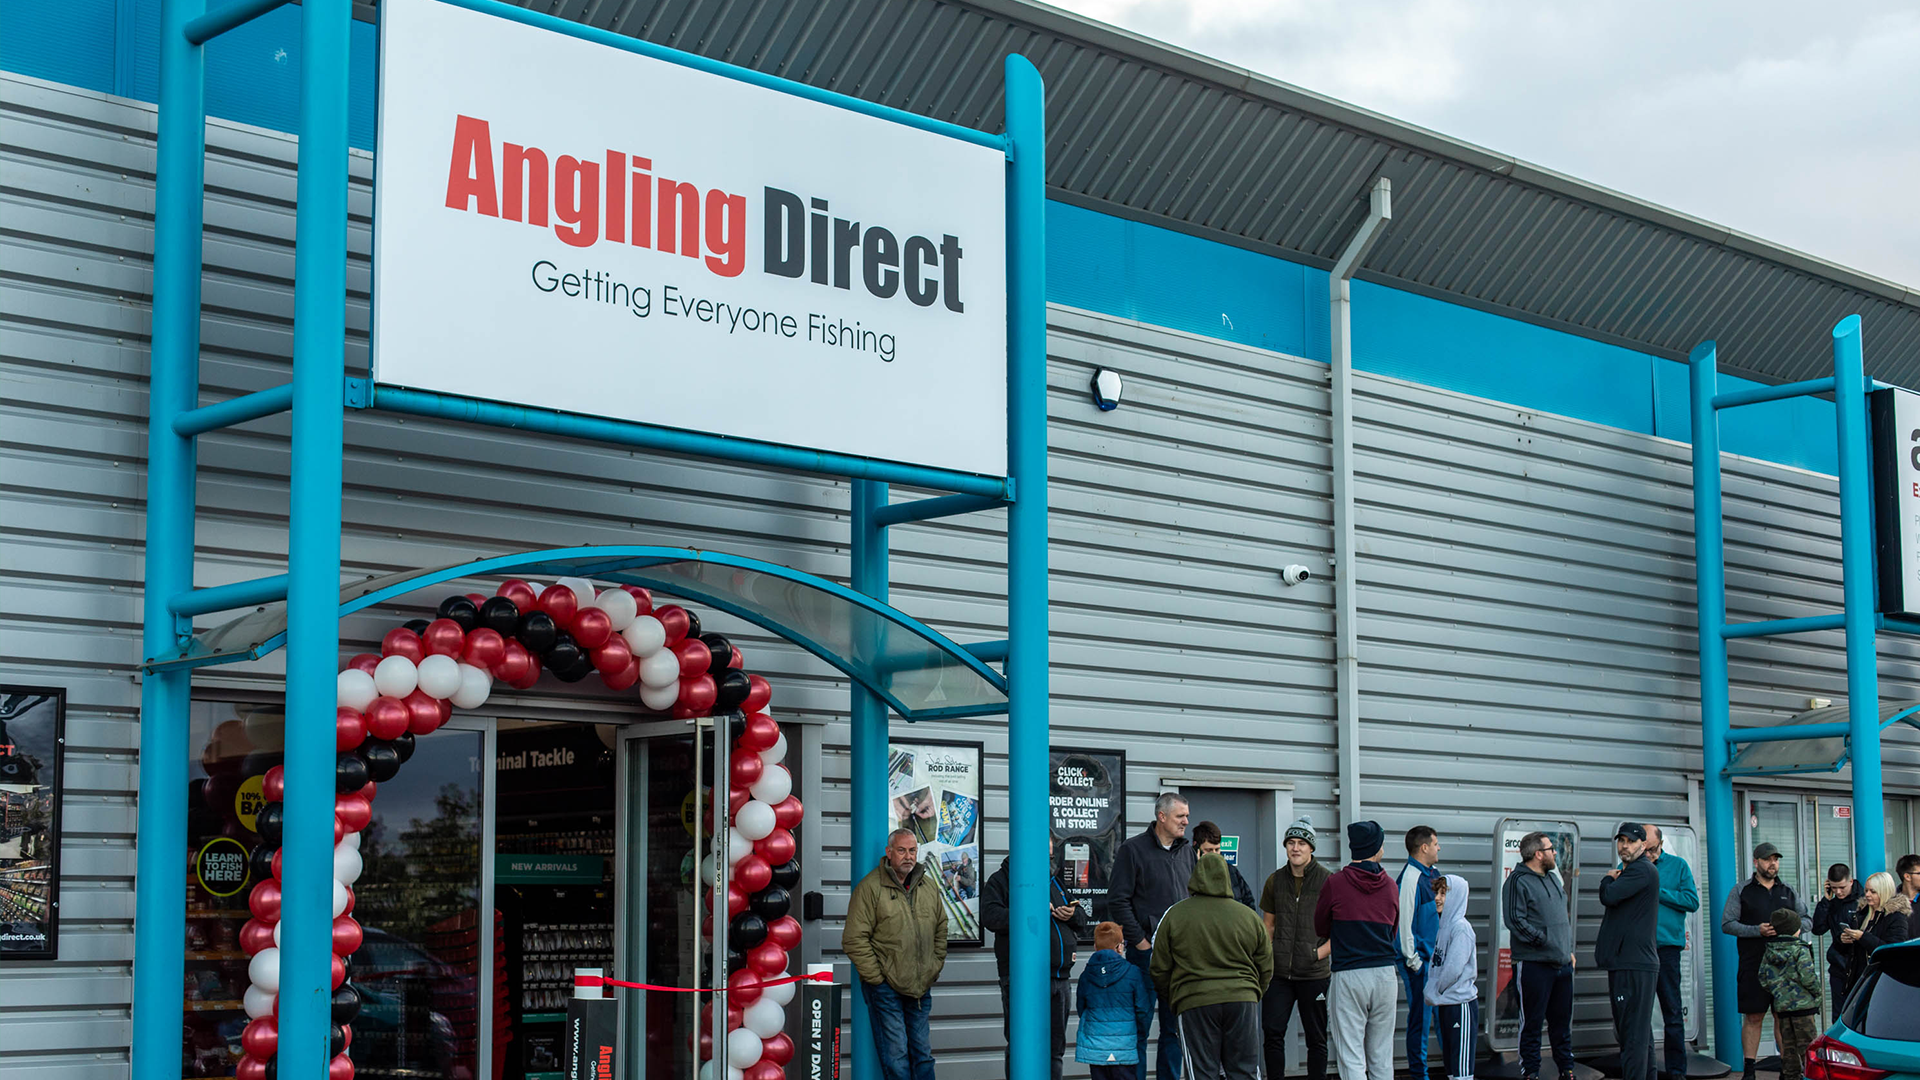 Angling Direct